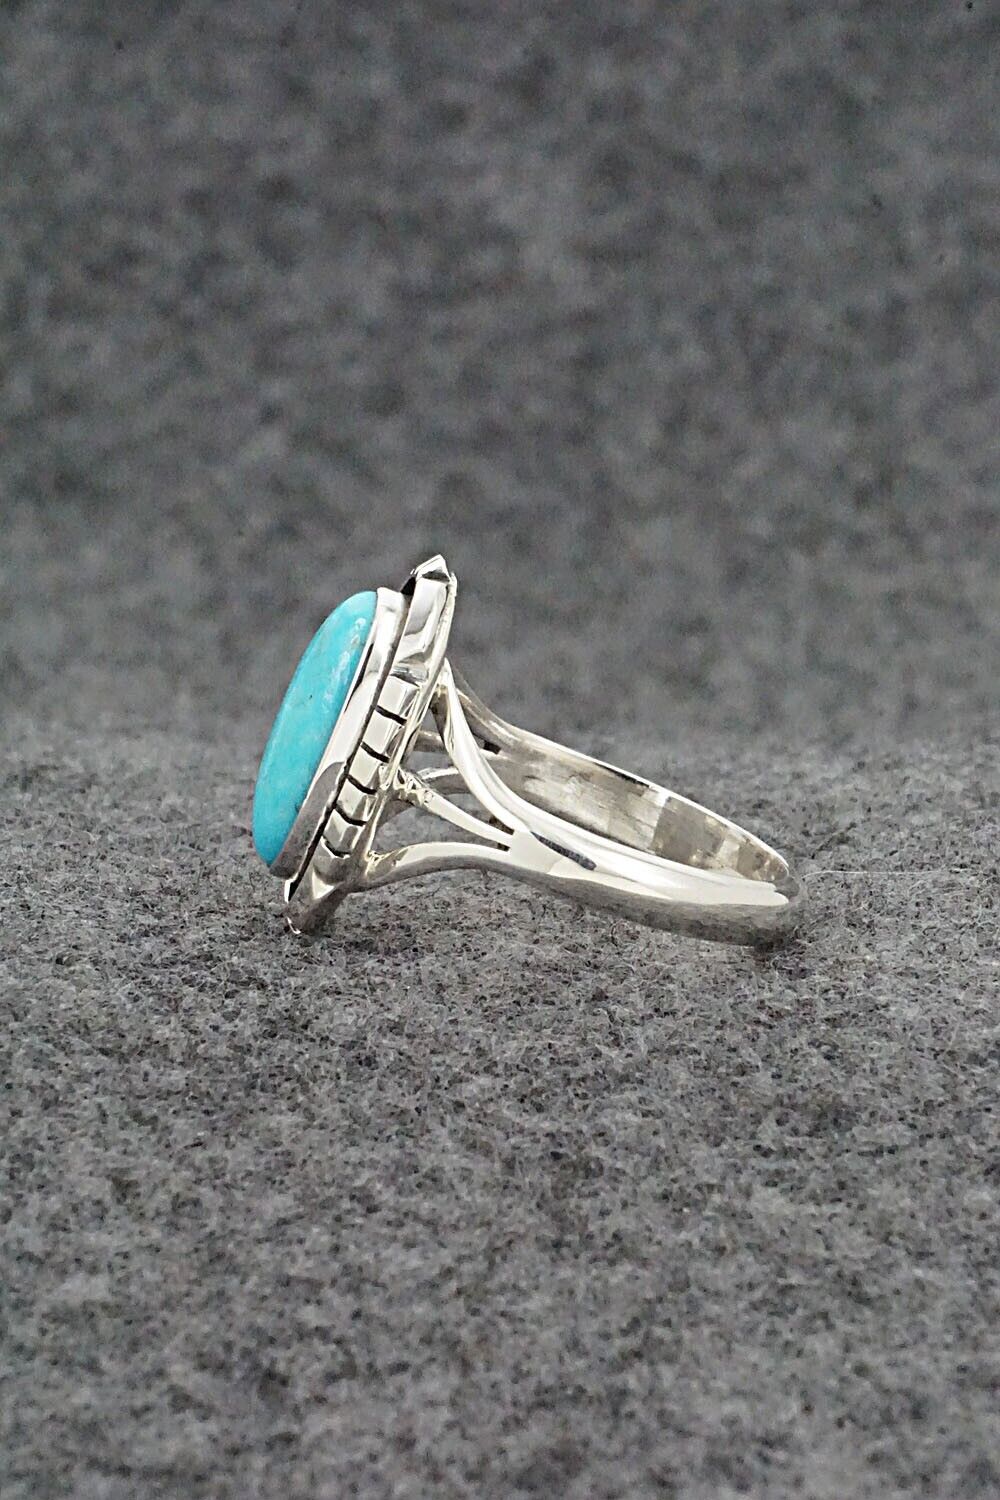 Turquoise & Sterling Silver Ring - Amos Begay - Size 9.25